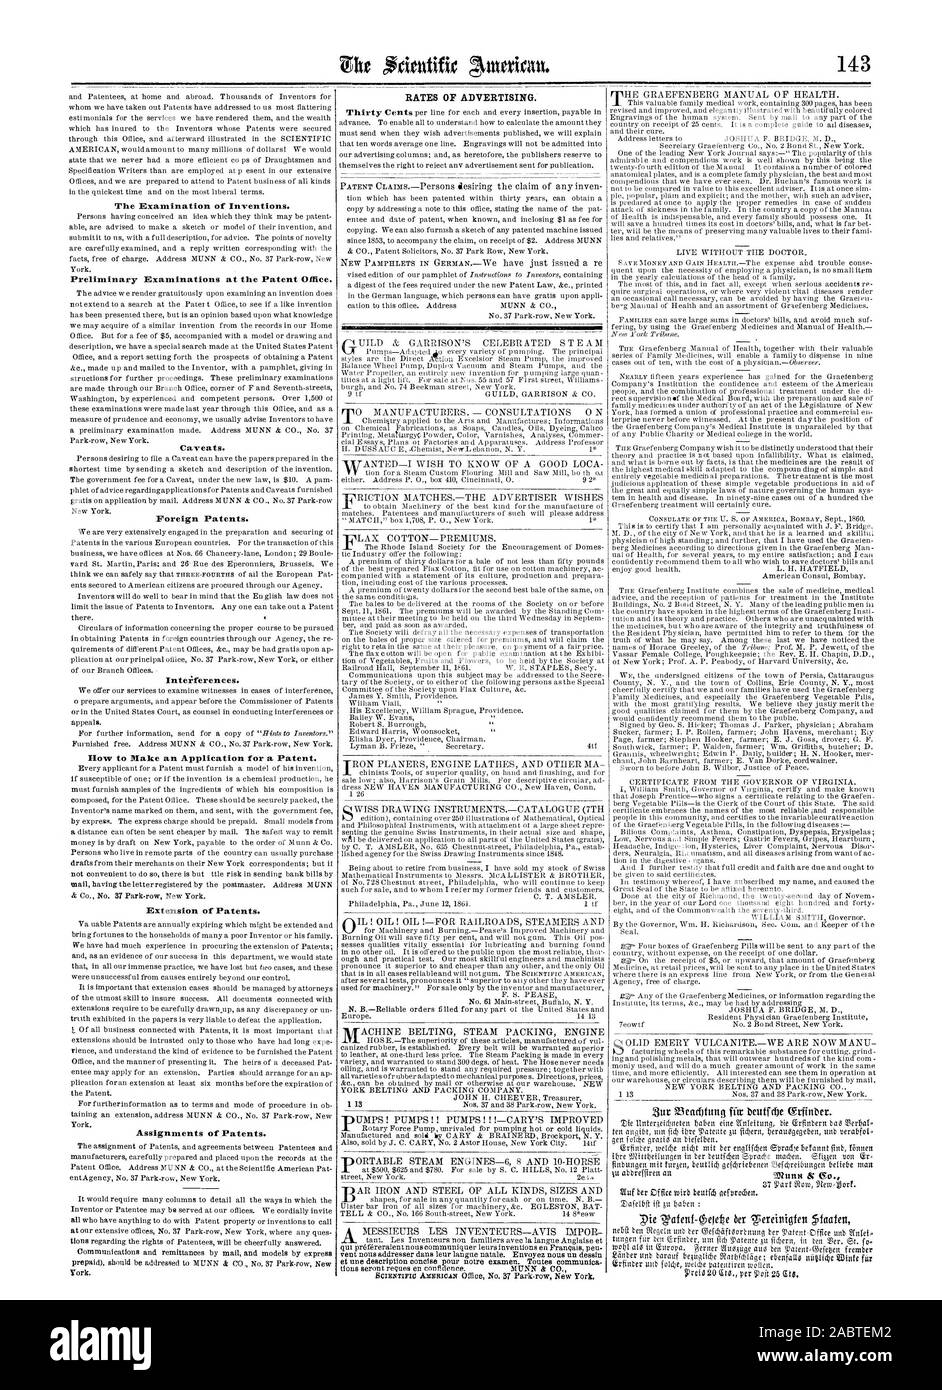 The Examination of Inventions. Preliminary Examinations at the Patent Office. Caveats. Foreign Patents. Inteiferences. How to Make an Application for a Patent. Extension of Patents. Assignments of Patents. RATES OF ADVERTISING., scientific american, 1861-08-31 Stock Photo